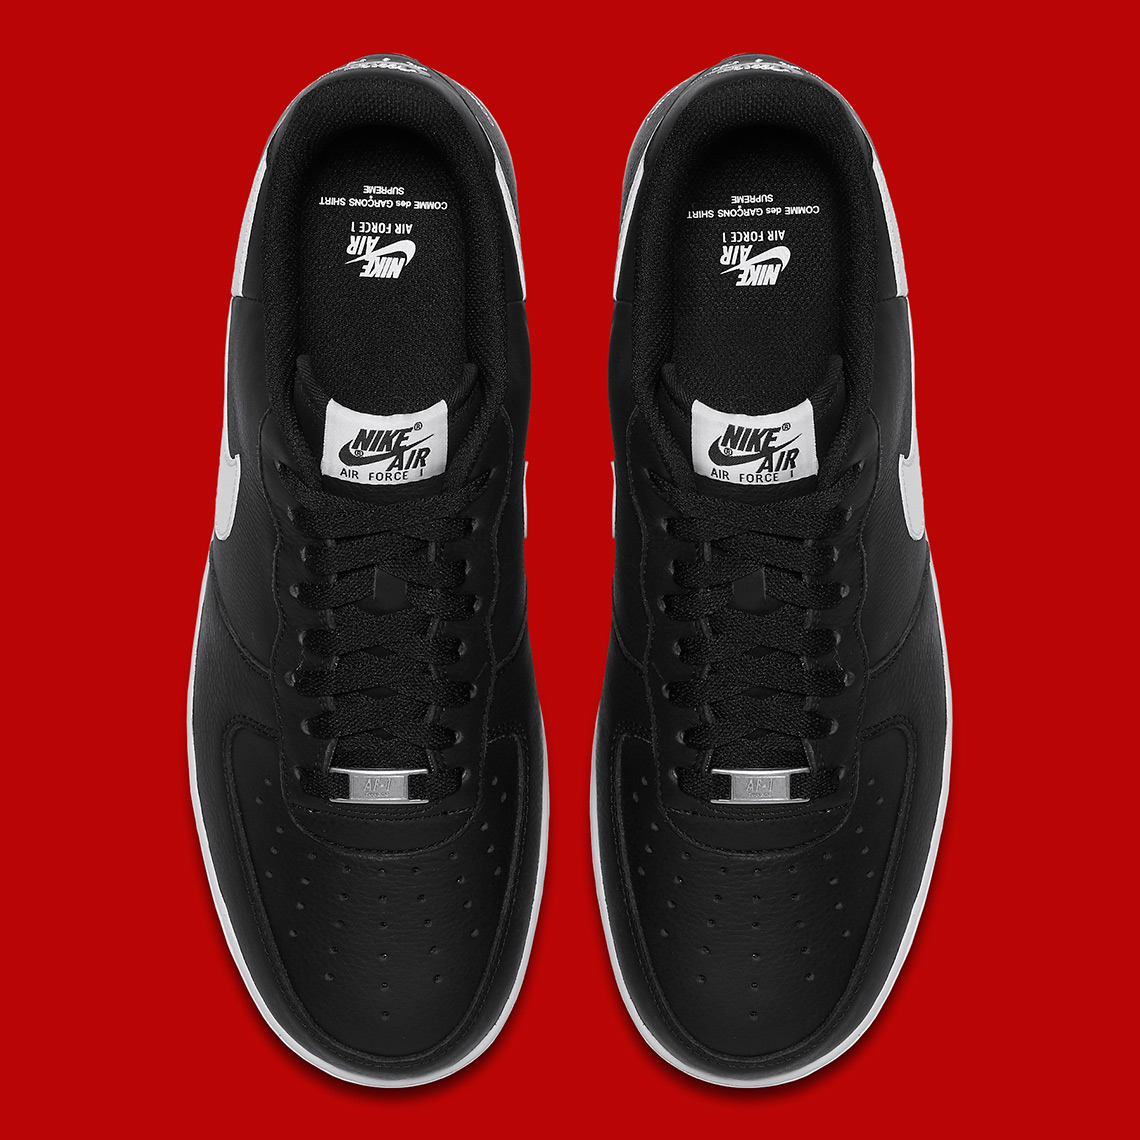 The Supreme x COMME des GARÇONS x Nike Air Force 1 Low Releases Tomorrow •